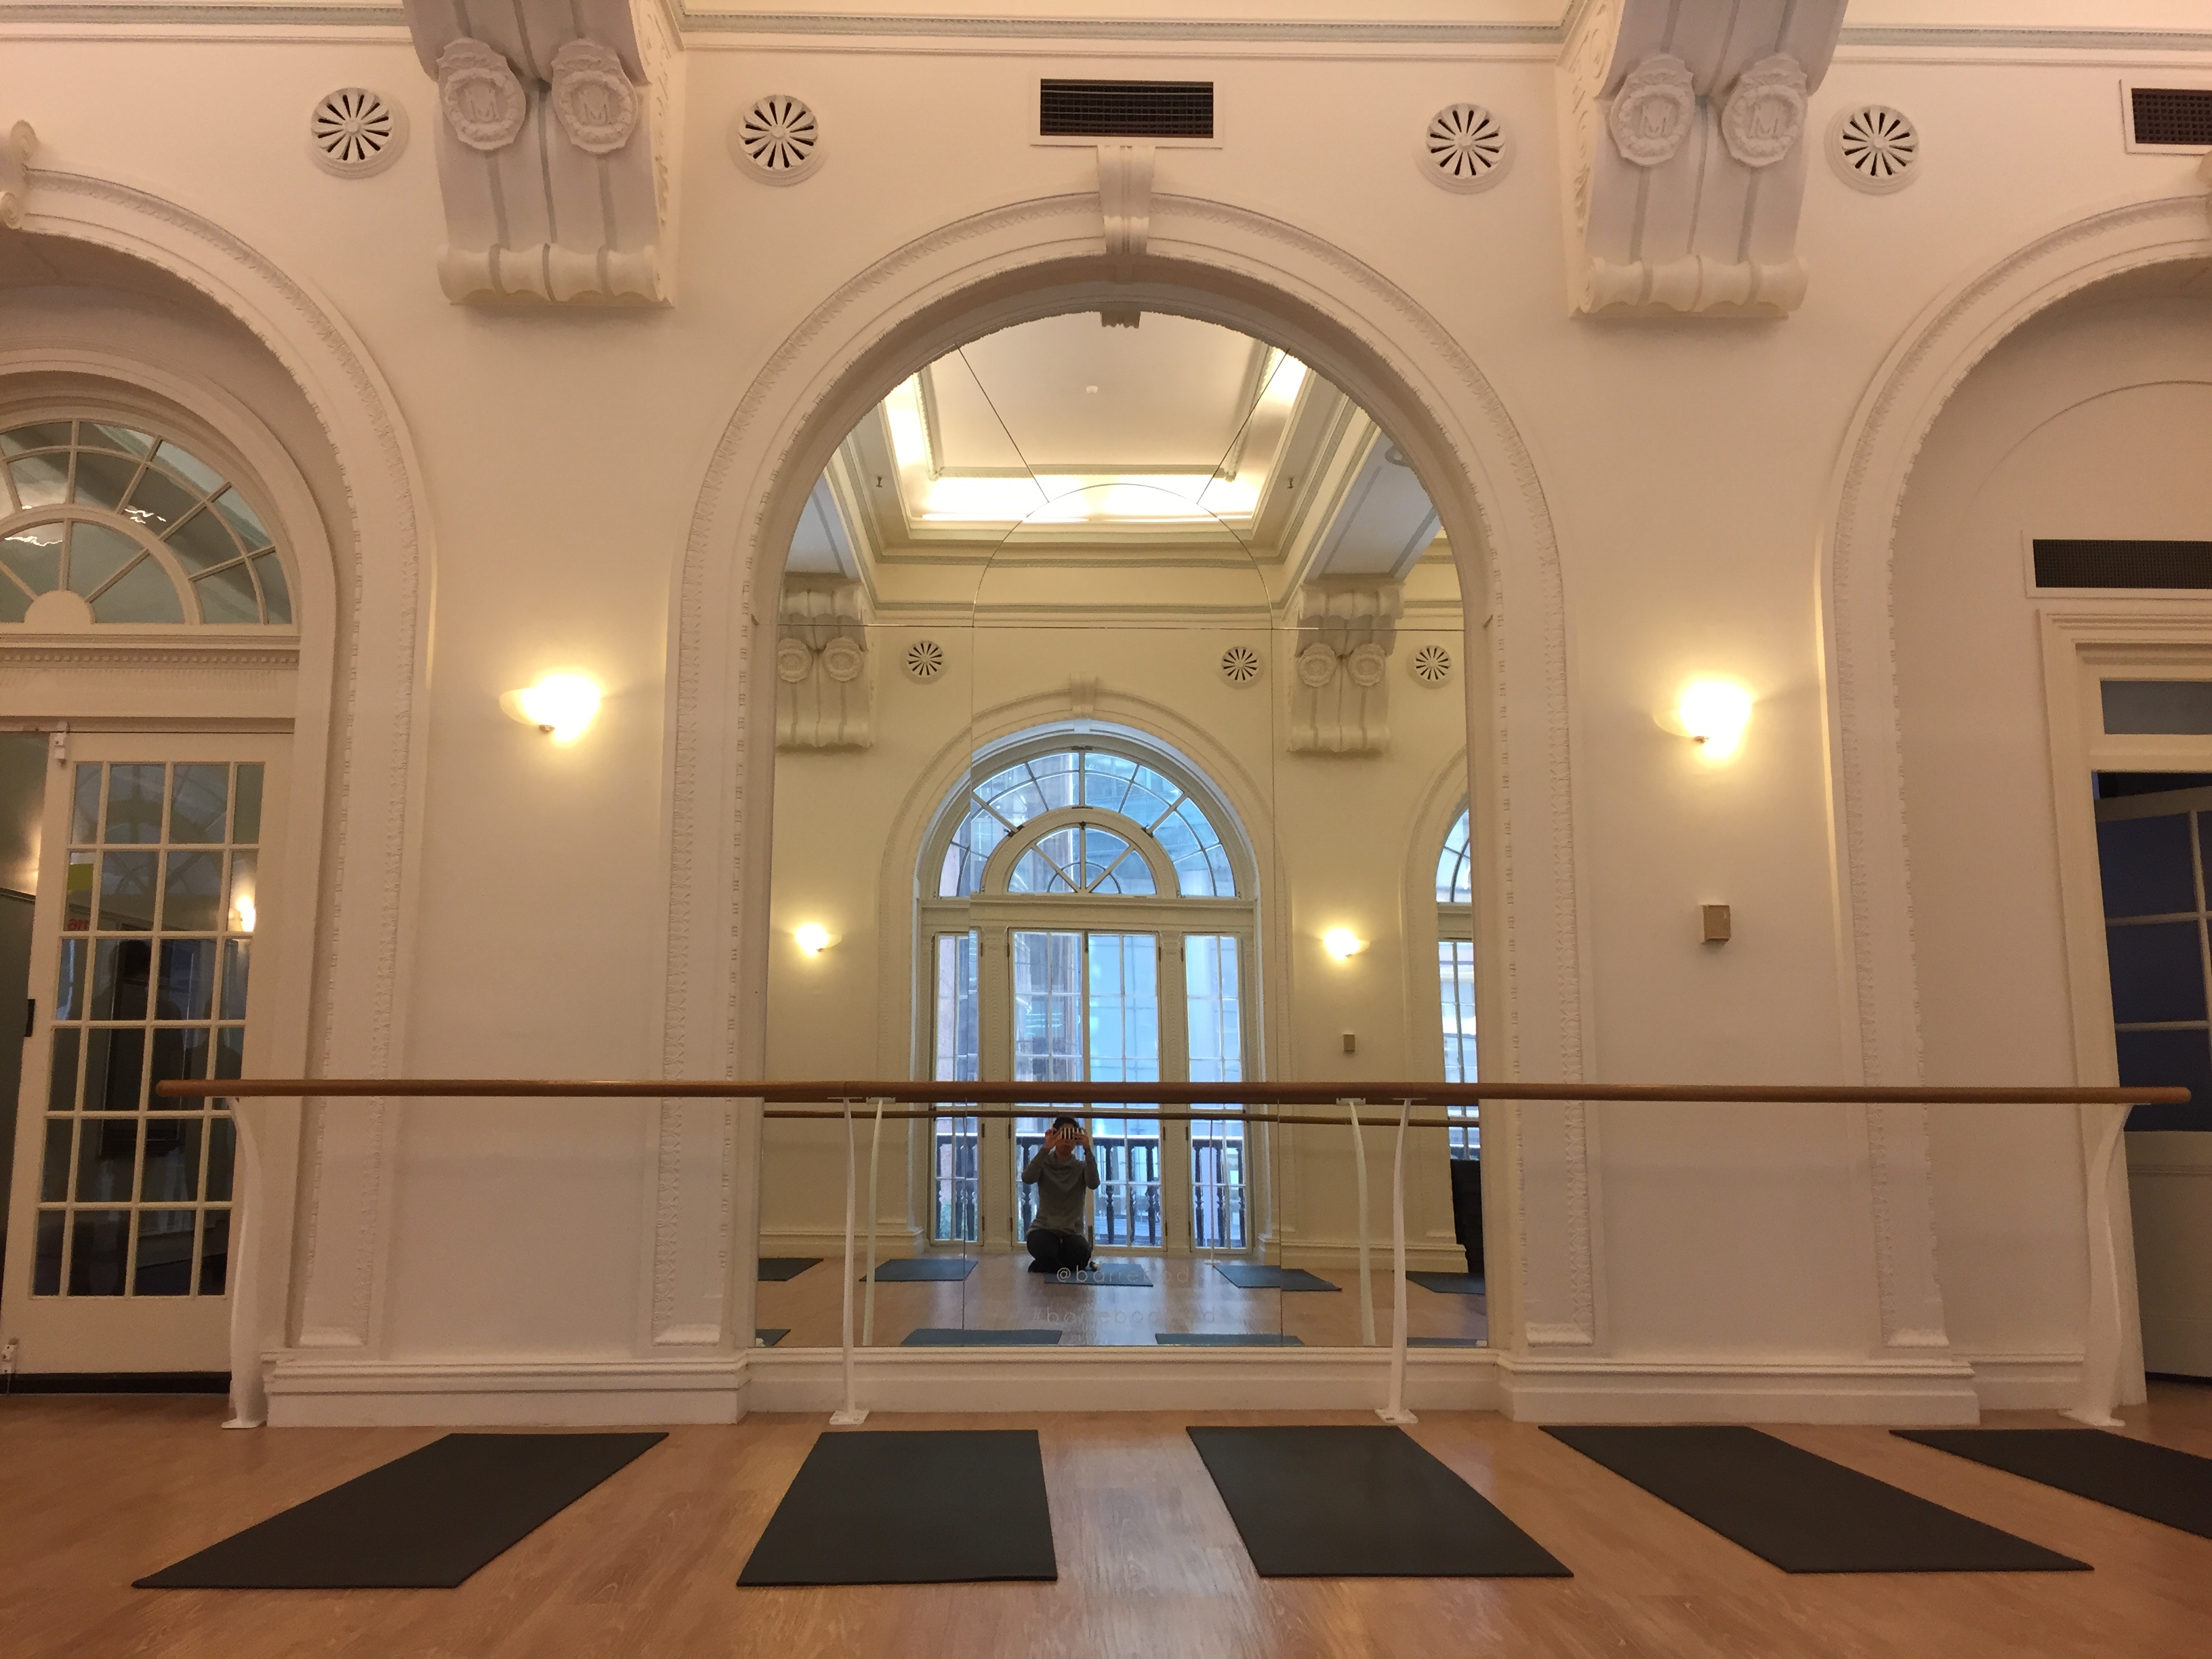 Barre Body Review - Sydney CBD - By Facemadeup